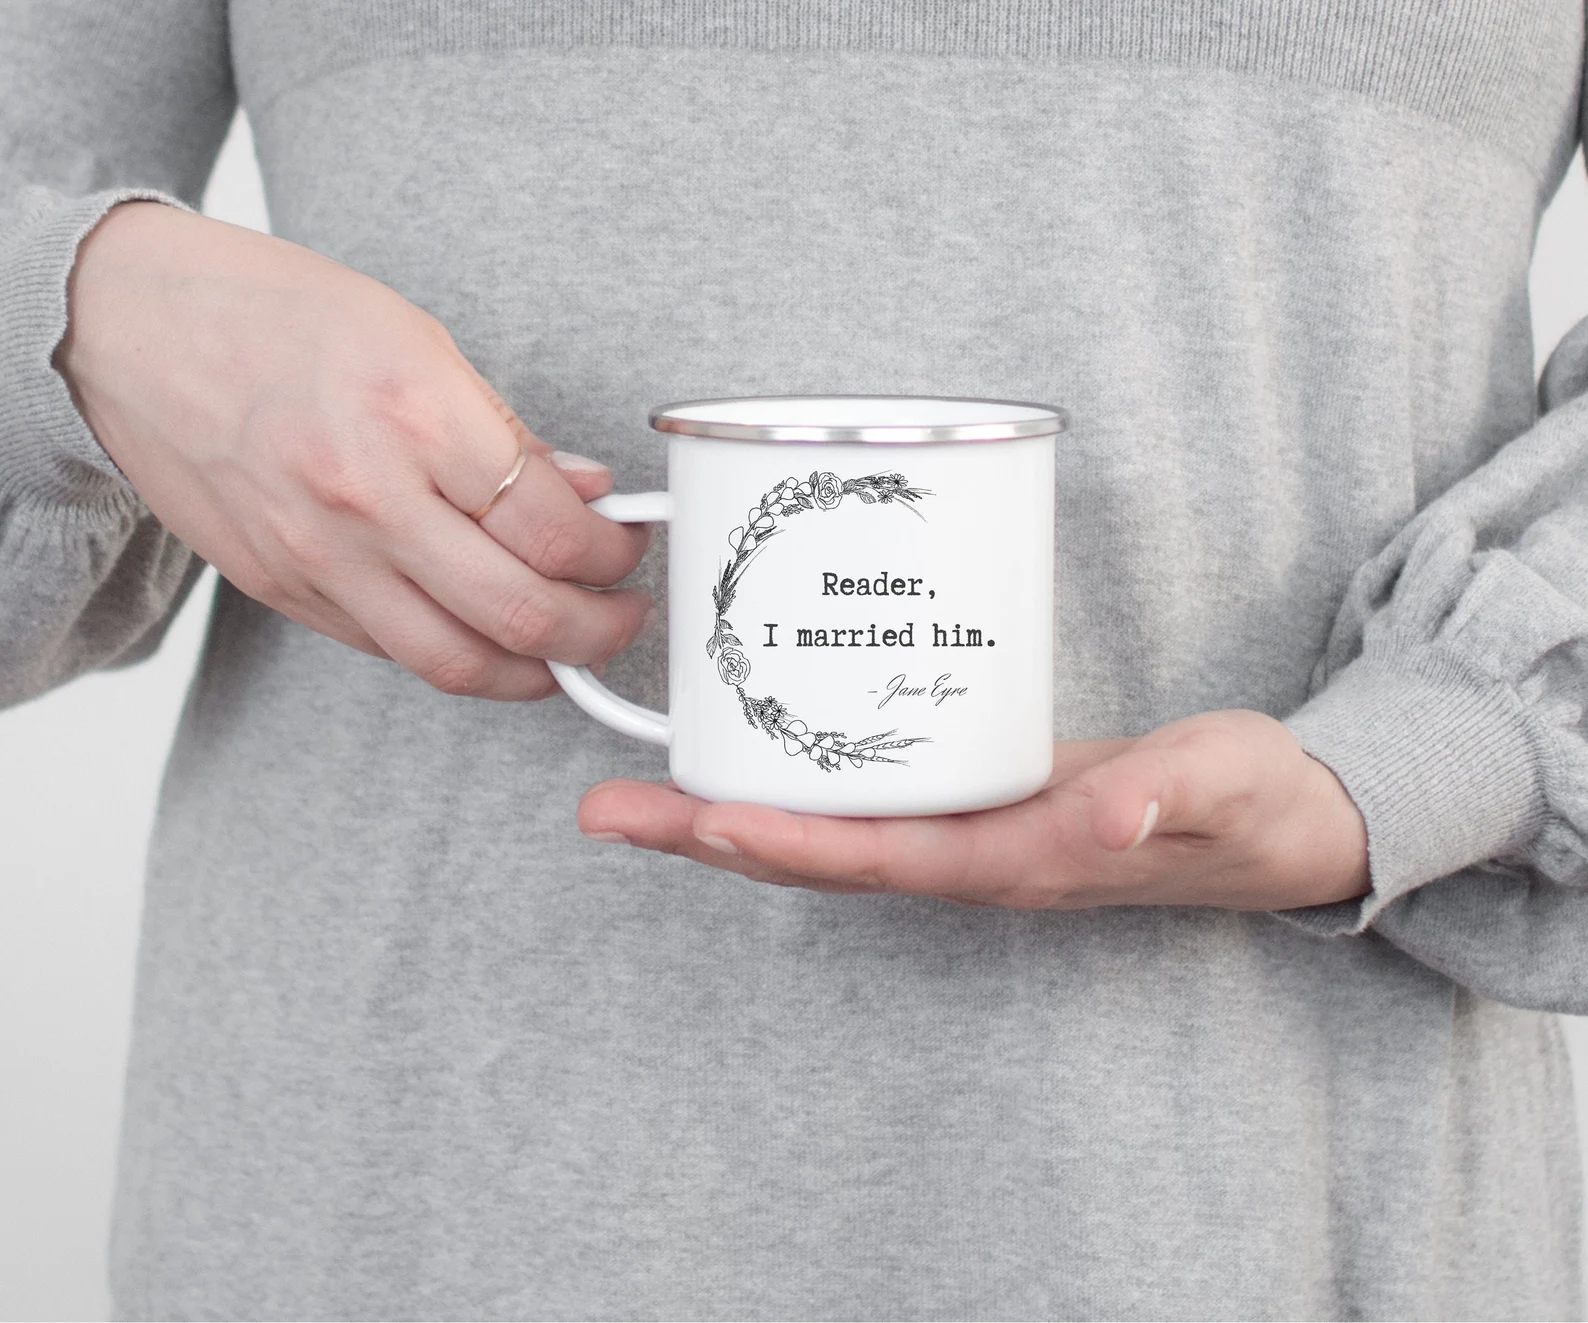 a white camp style mug that reads "Reader, I married him."